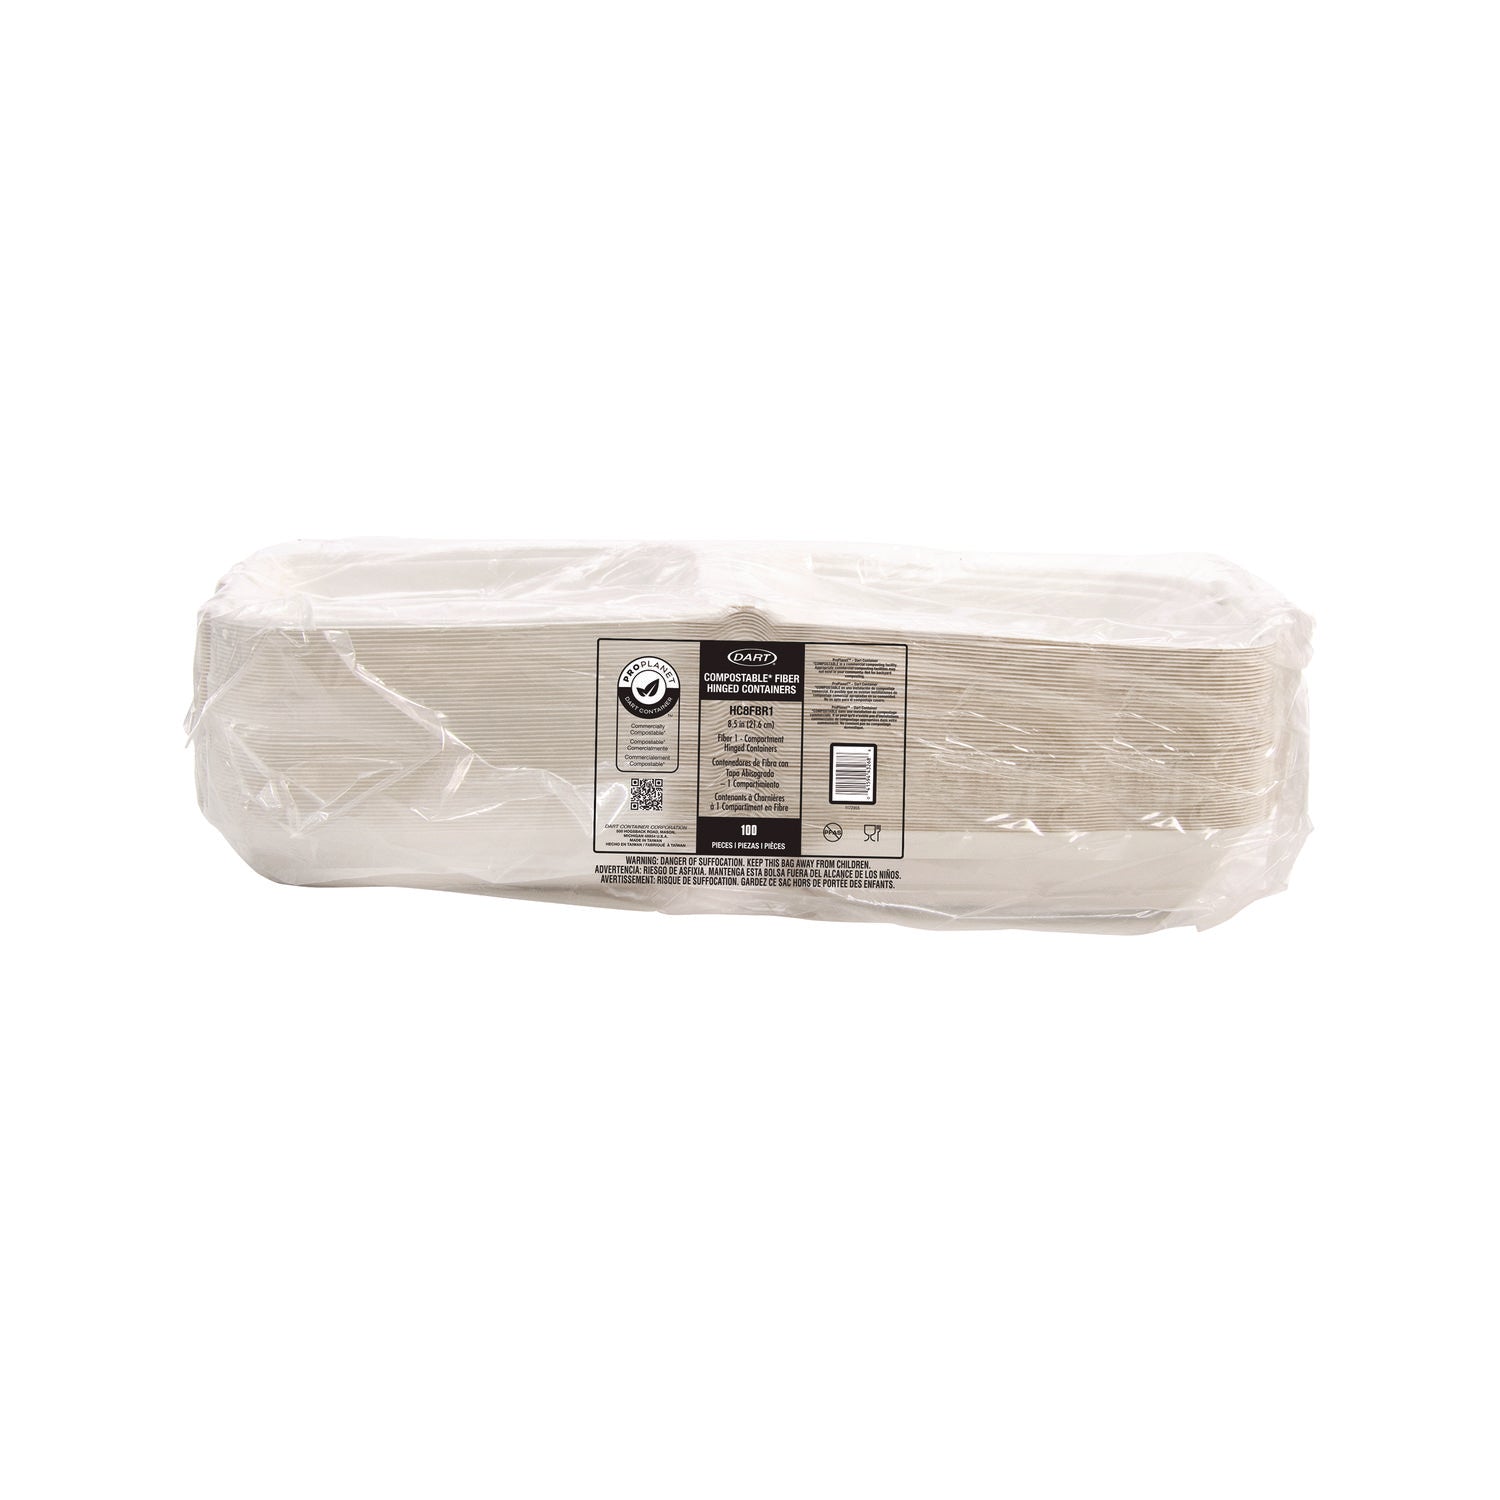 compostable-fiber-hinged-trays-proplanet-seal-803-x-838-x-193-ivory-molded-fiber-200-carton_dcchc8fbr1 - 5